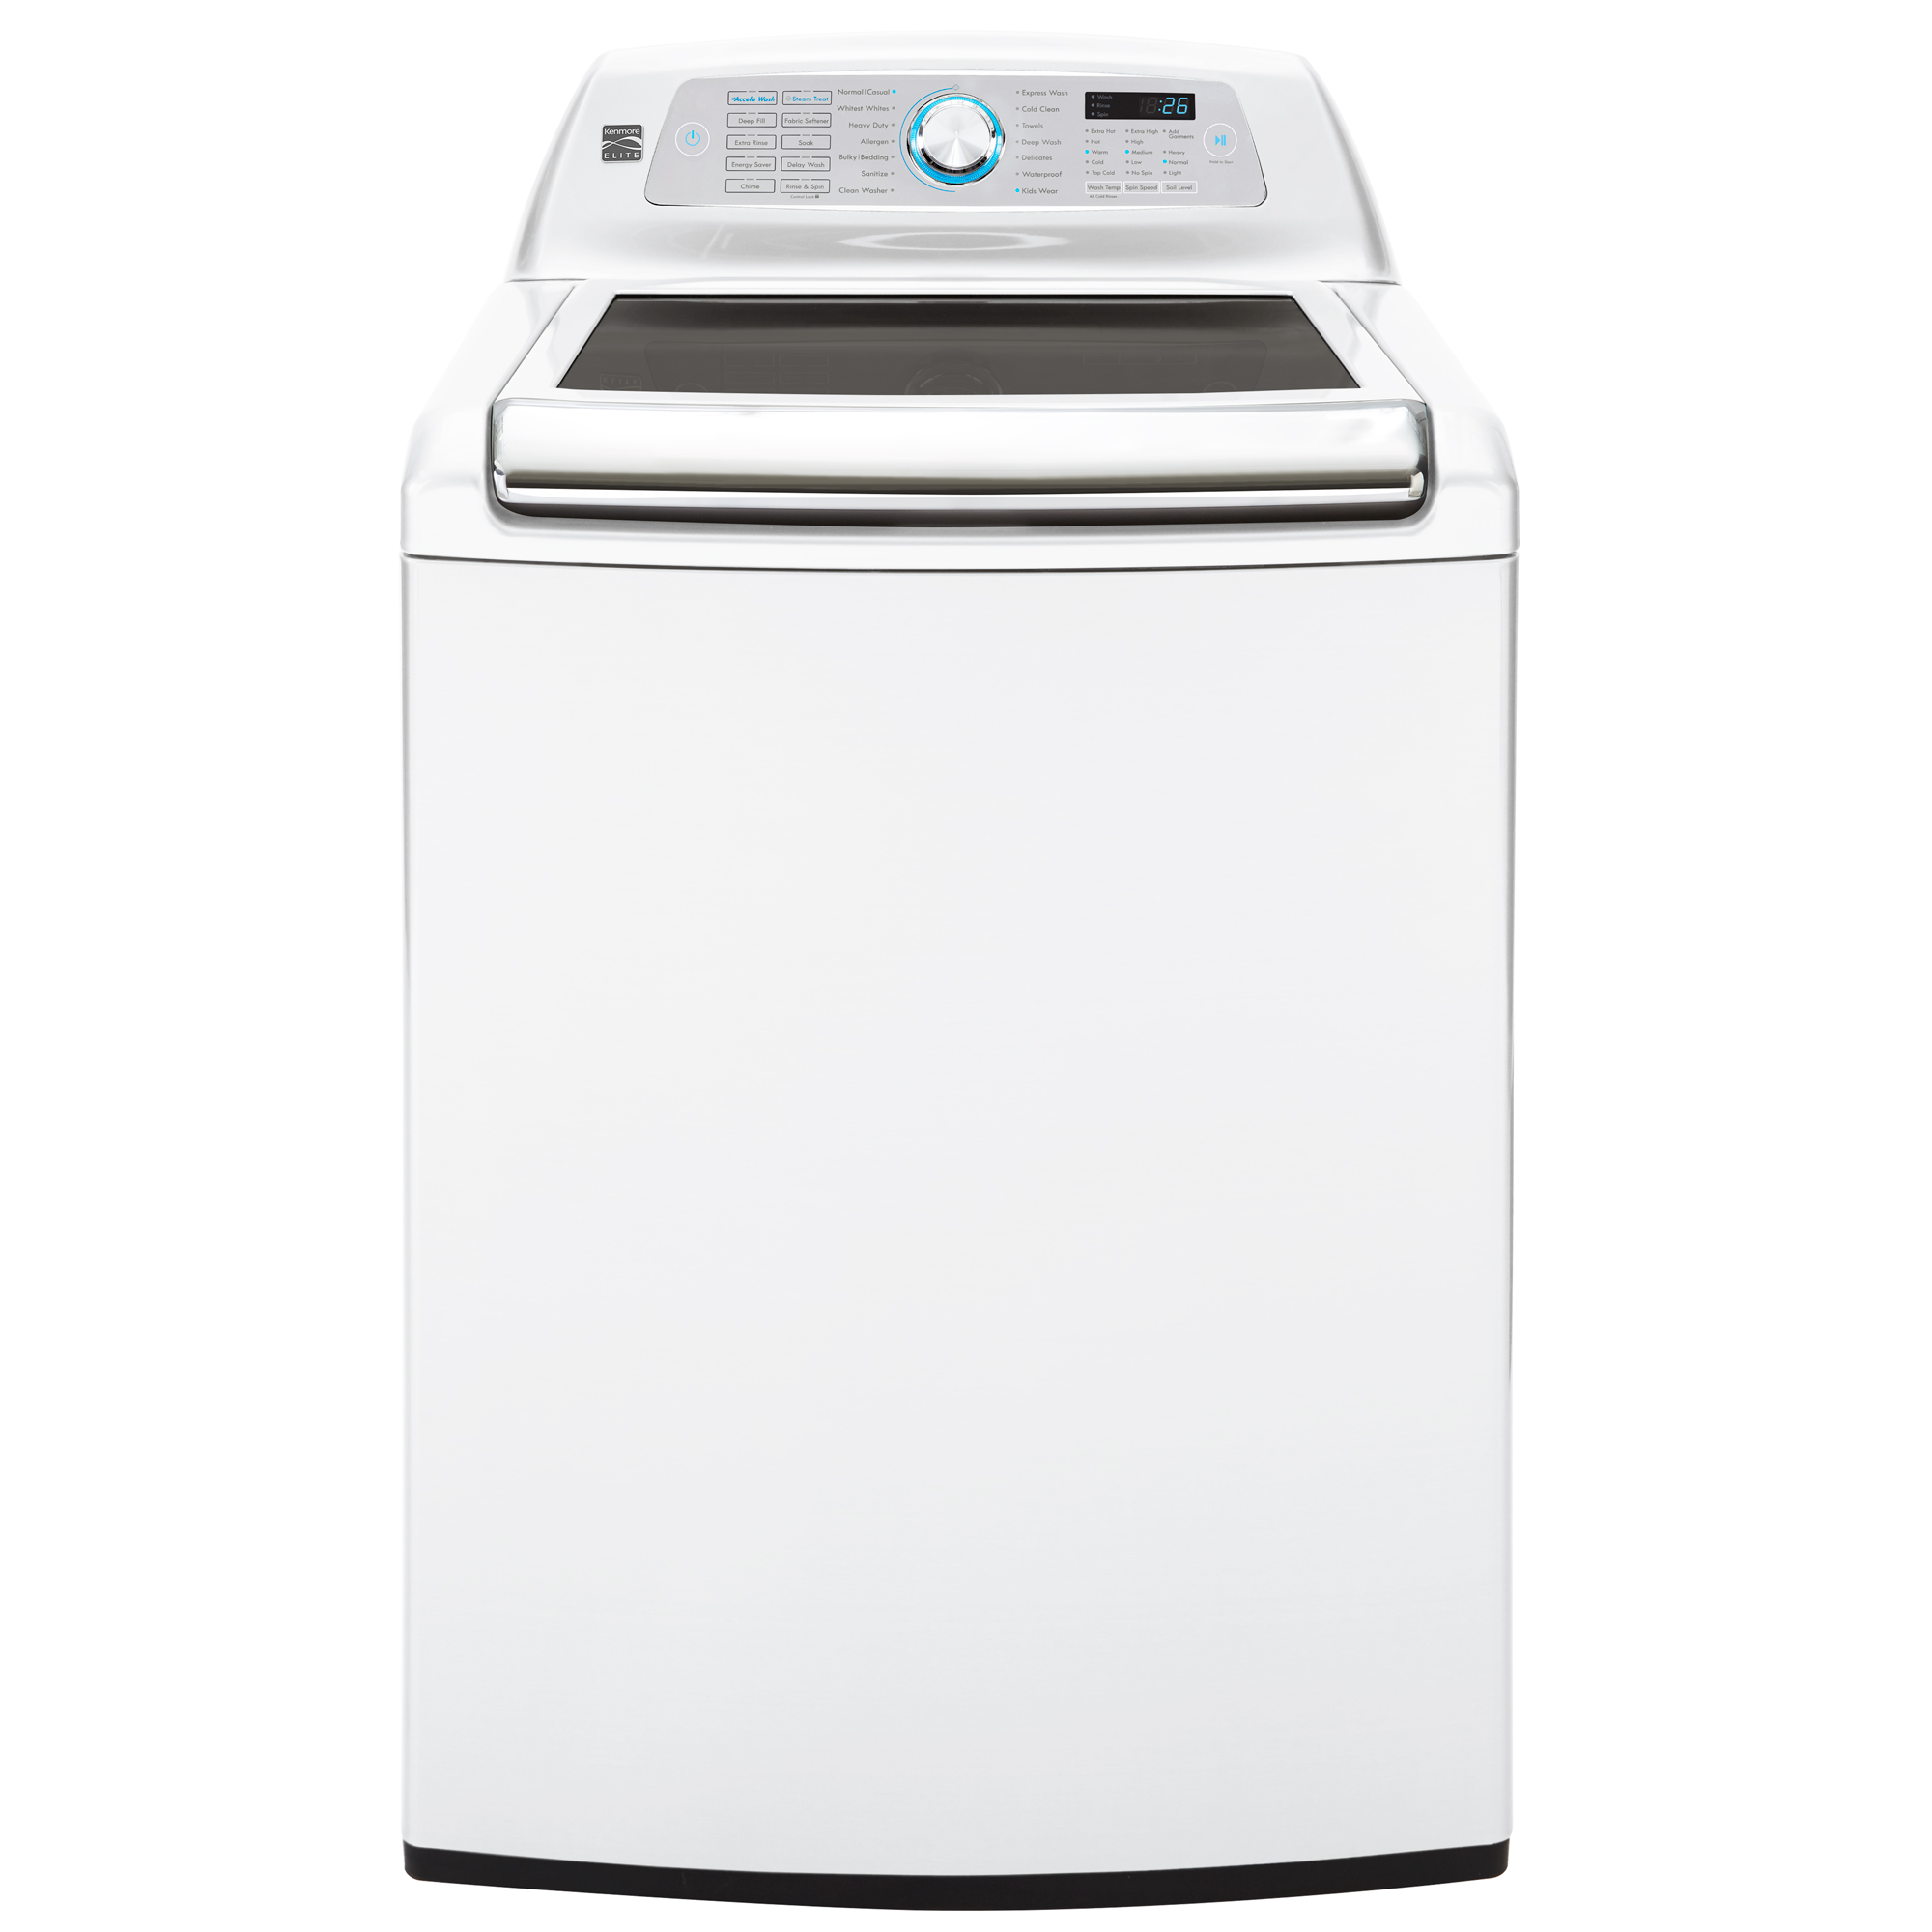 Kenmore Elite Kenmore Elite 31552 5.2 cu. ft. Top-Load Washer w/Steam Treat & Accela Wash - White